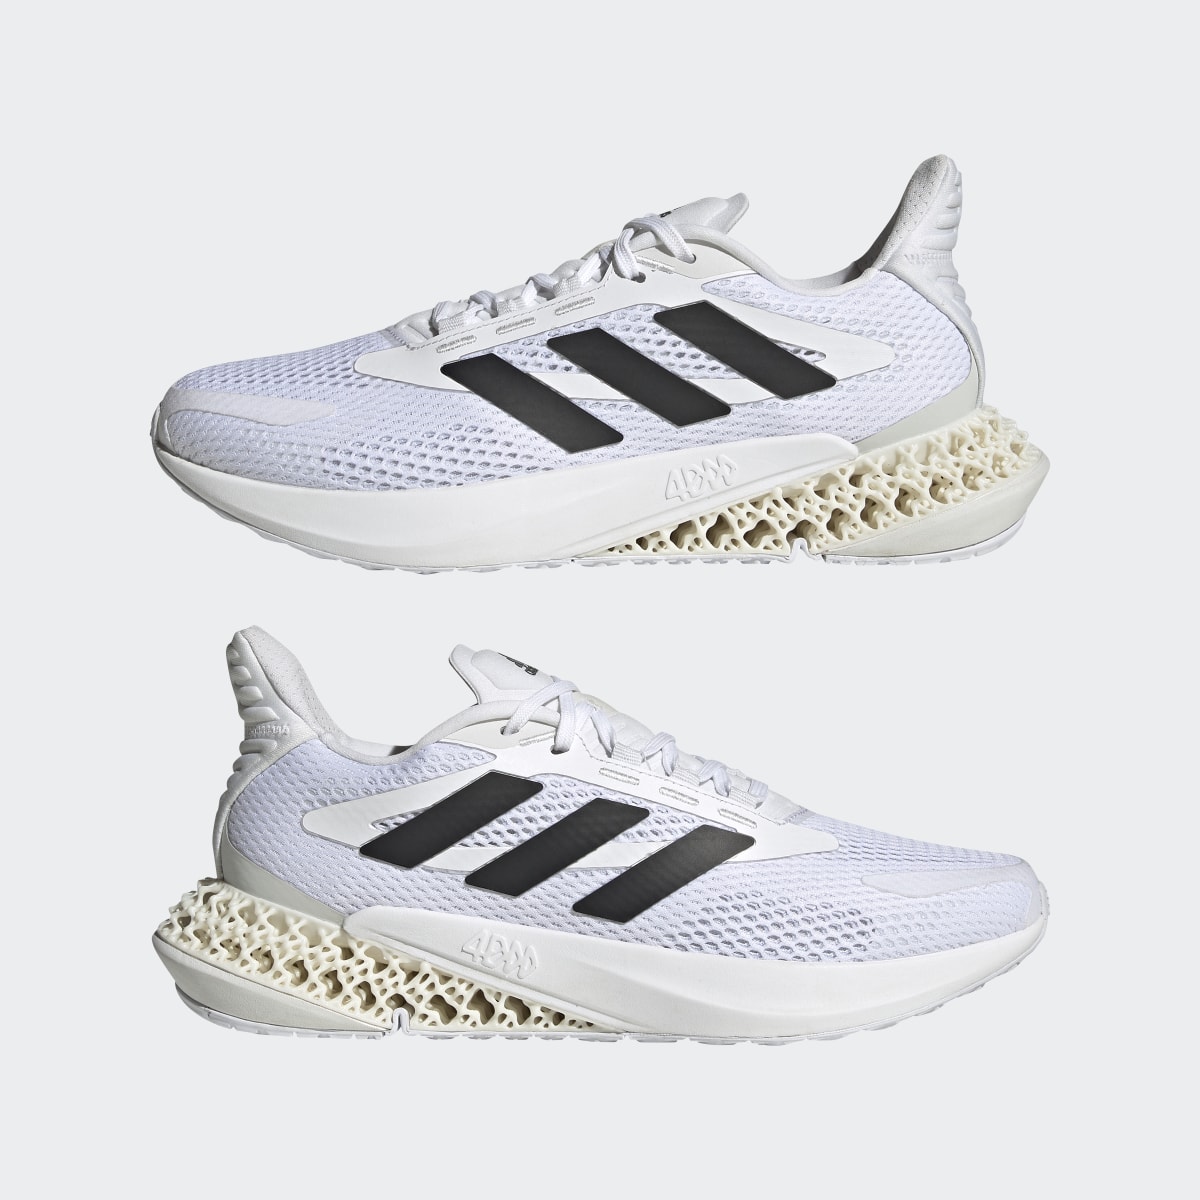 Adidas 4DFWD Pulse Shoes. 8